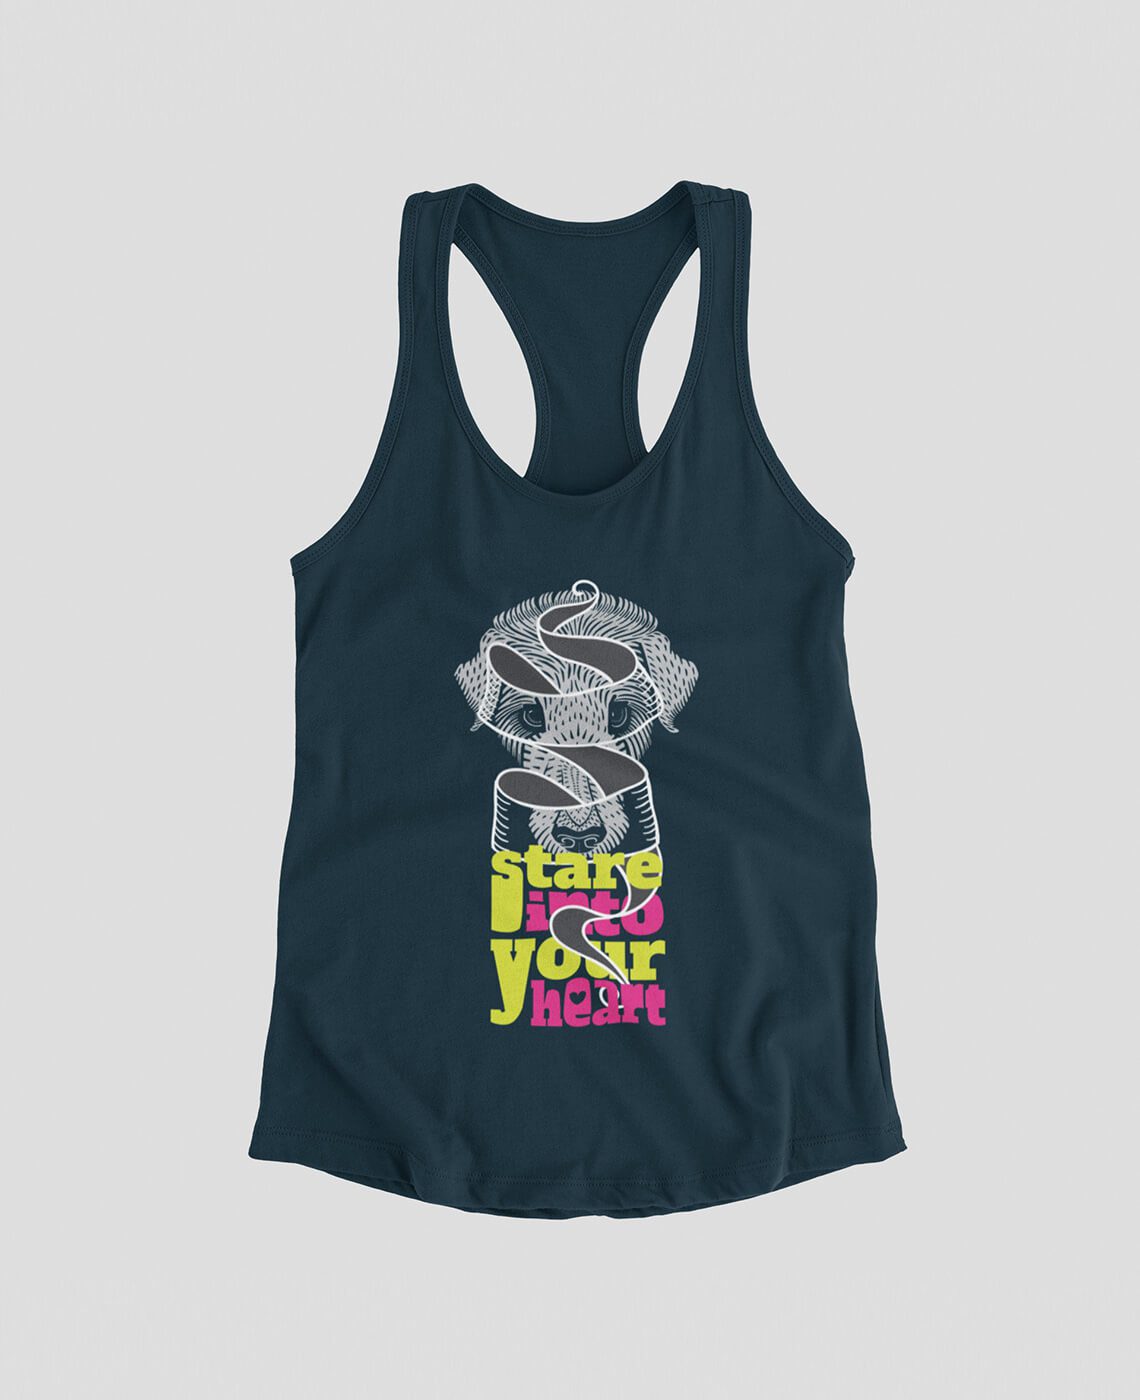 stare one 7 womens tank top 2